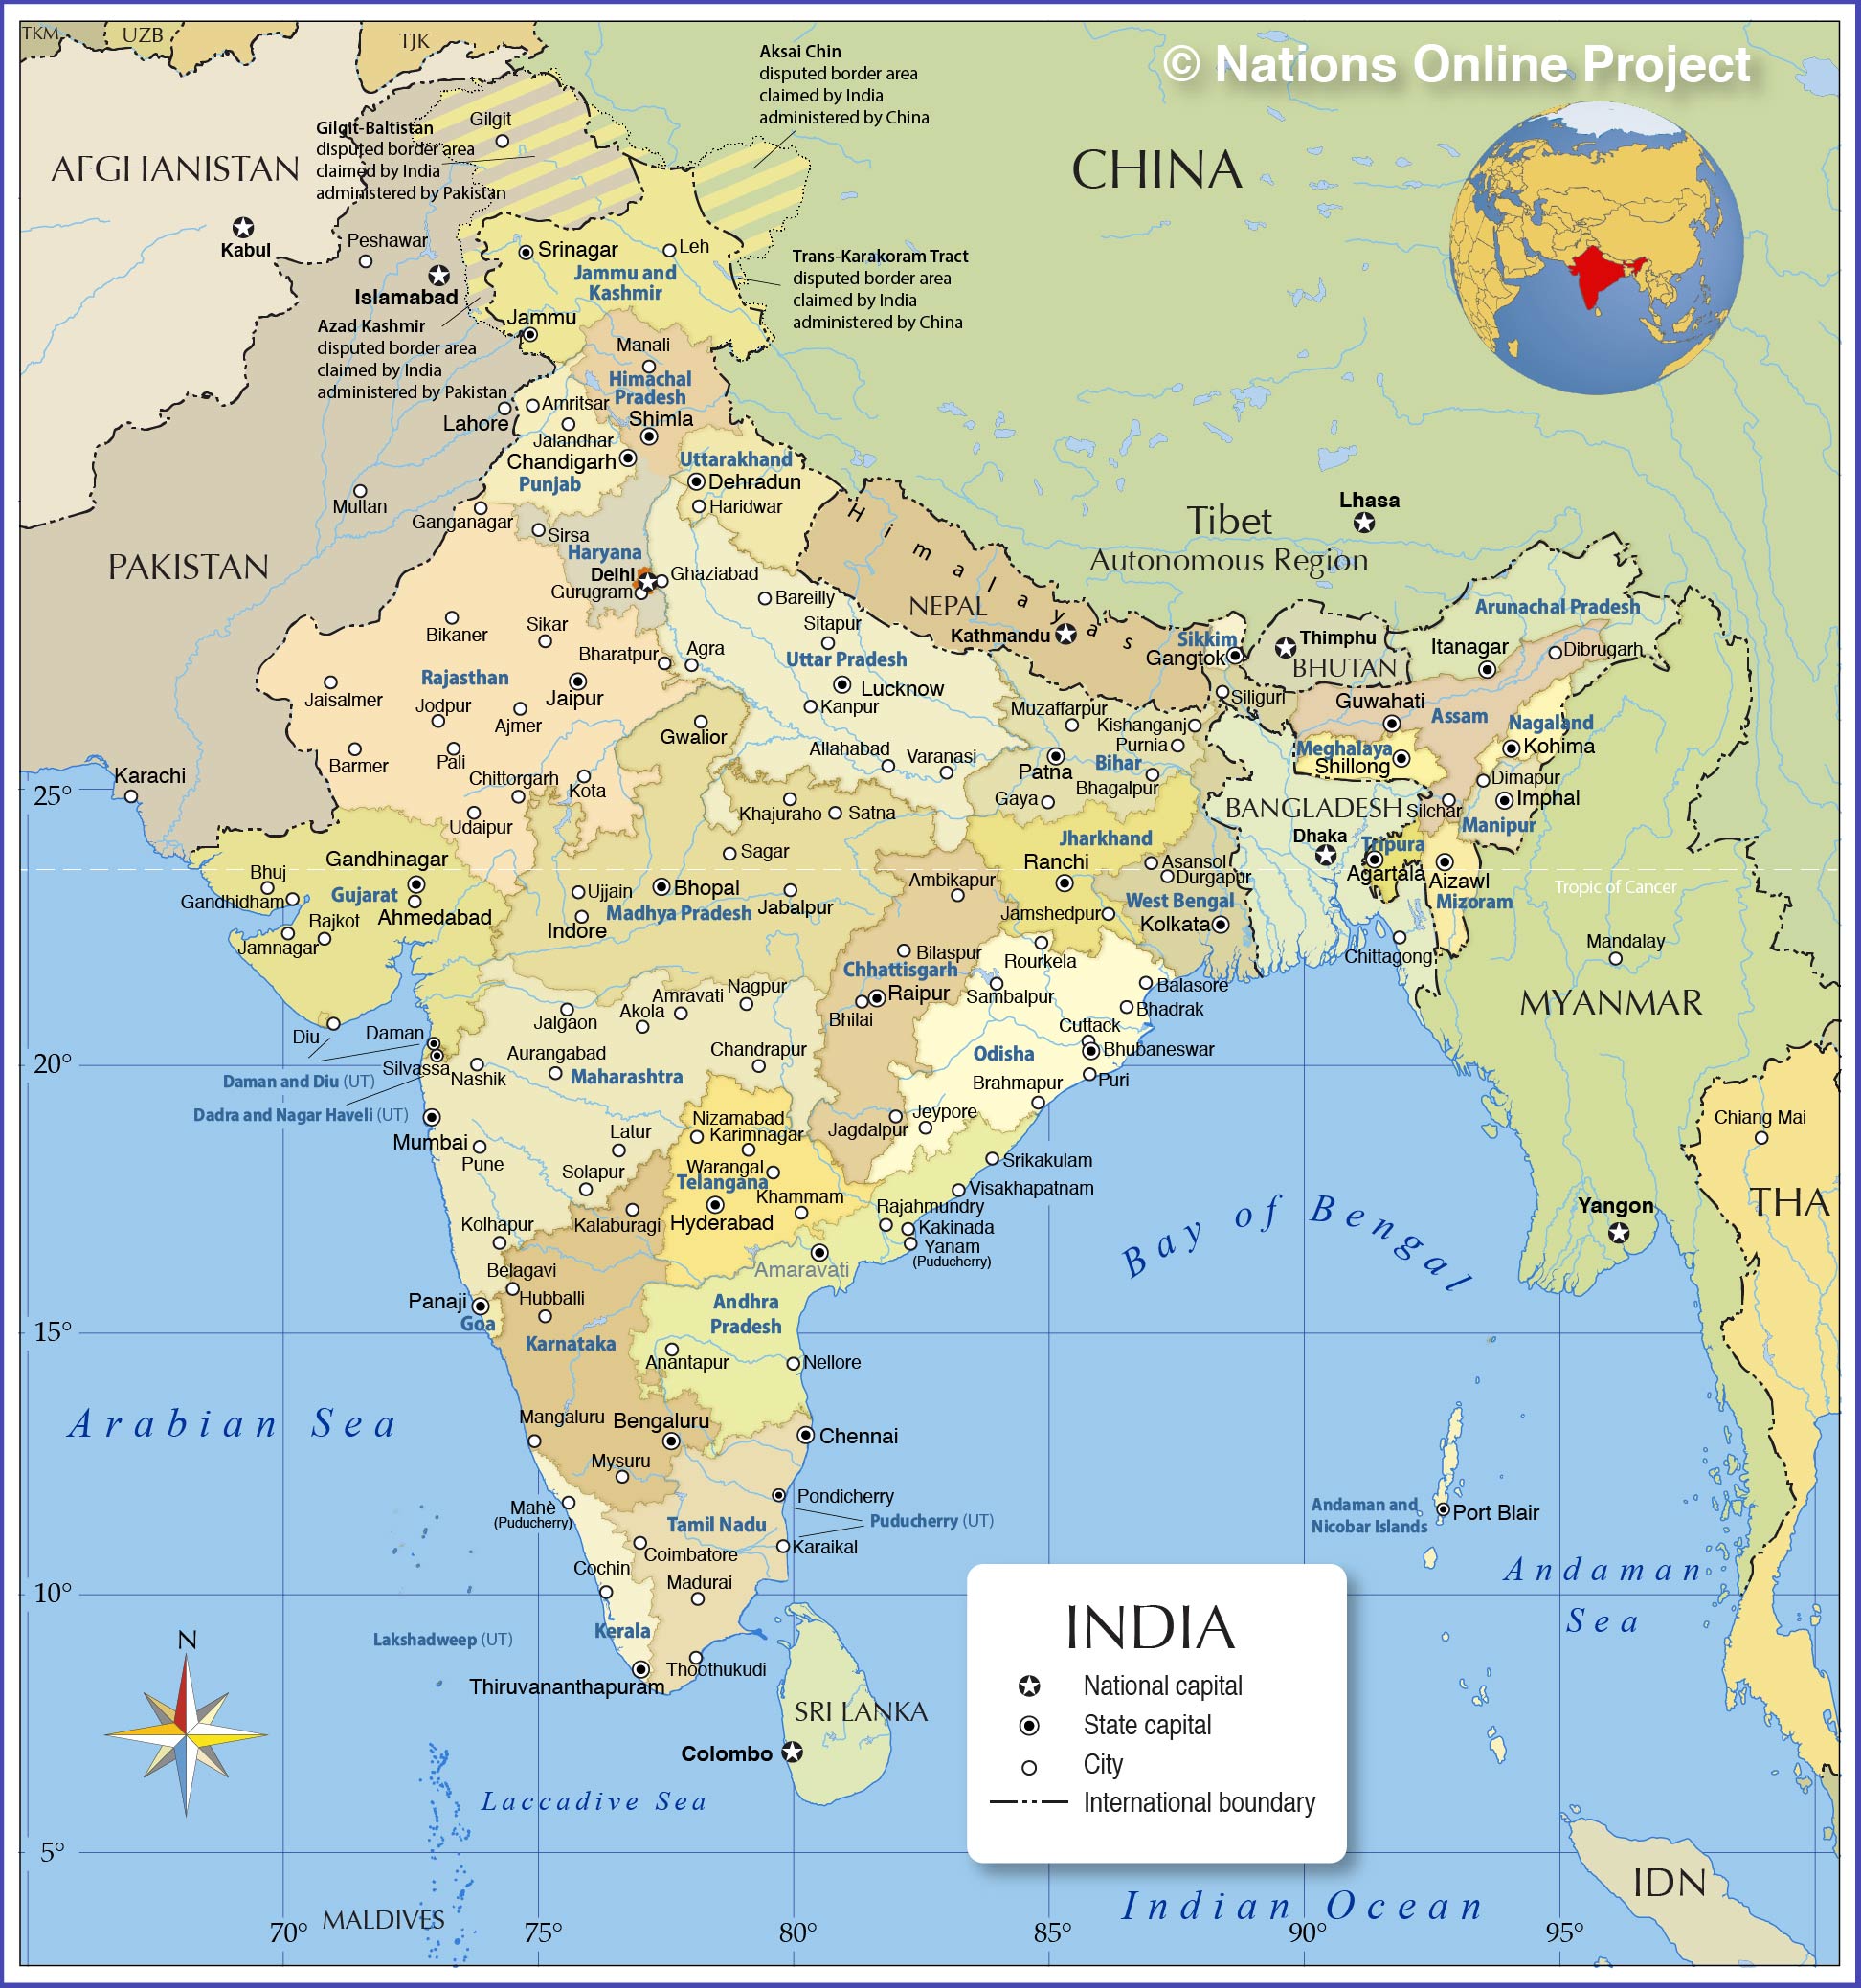 show me the map of india with states name Political Map Of India S States Nations Online Project show me the map of india with states name